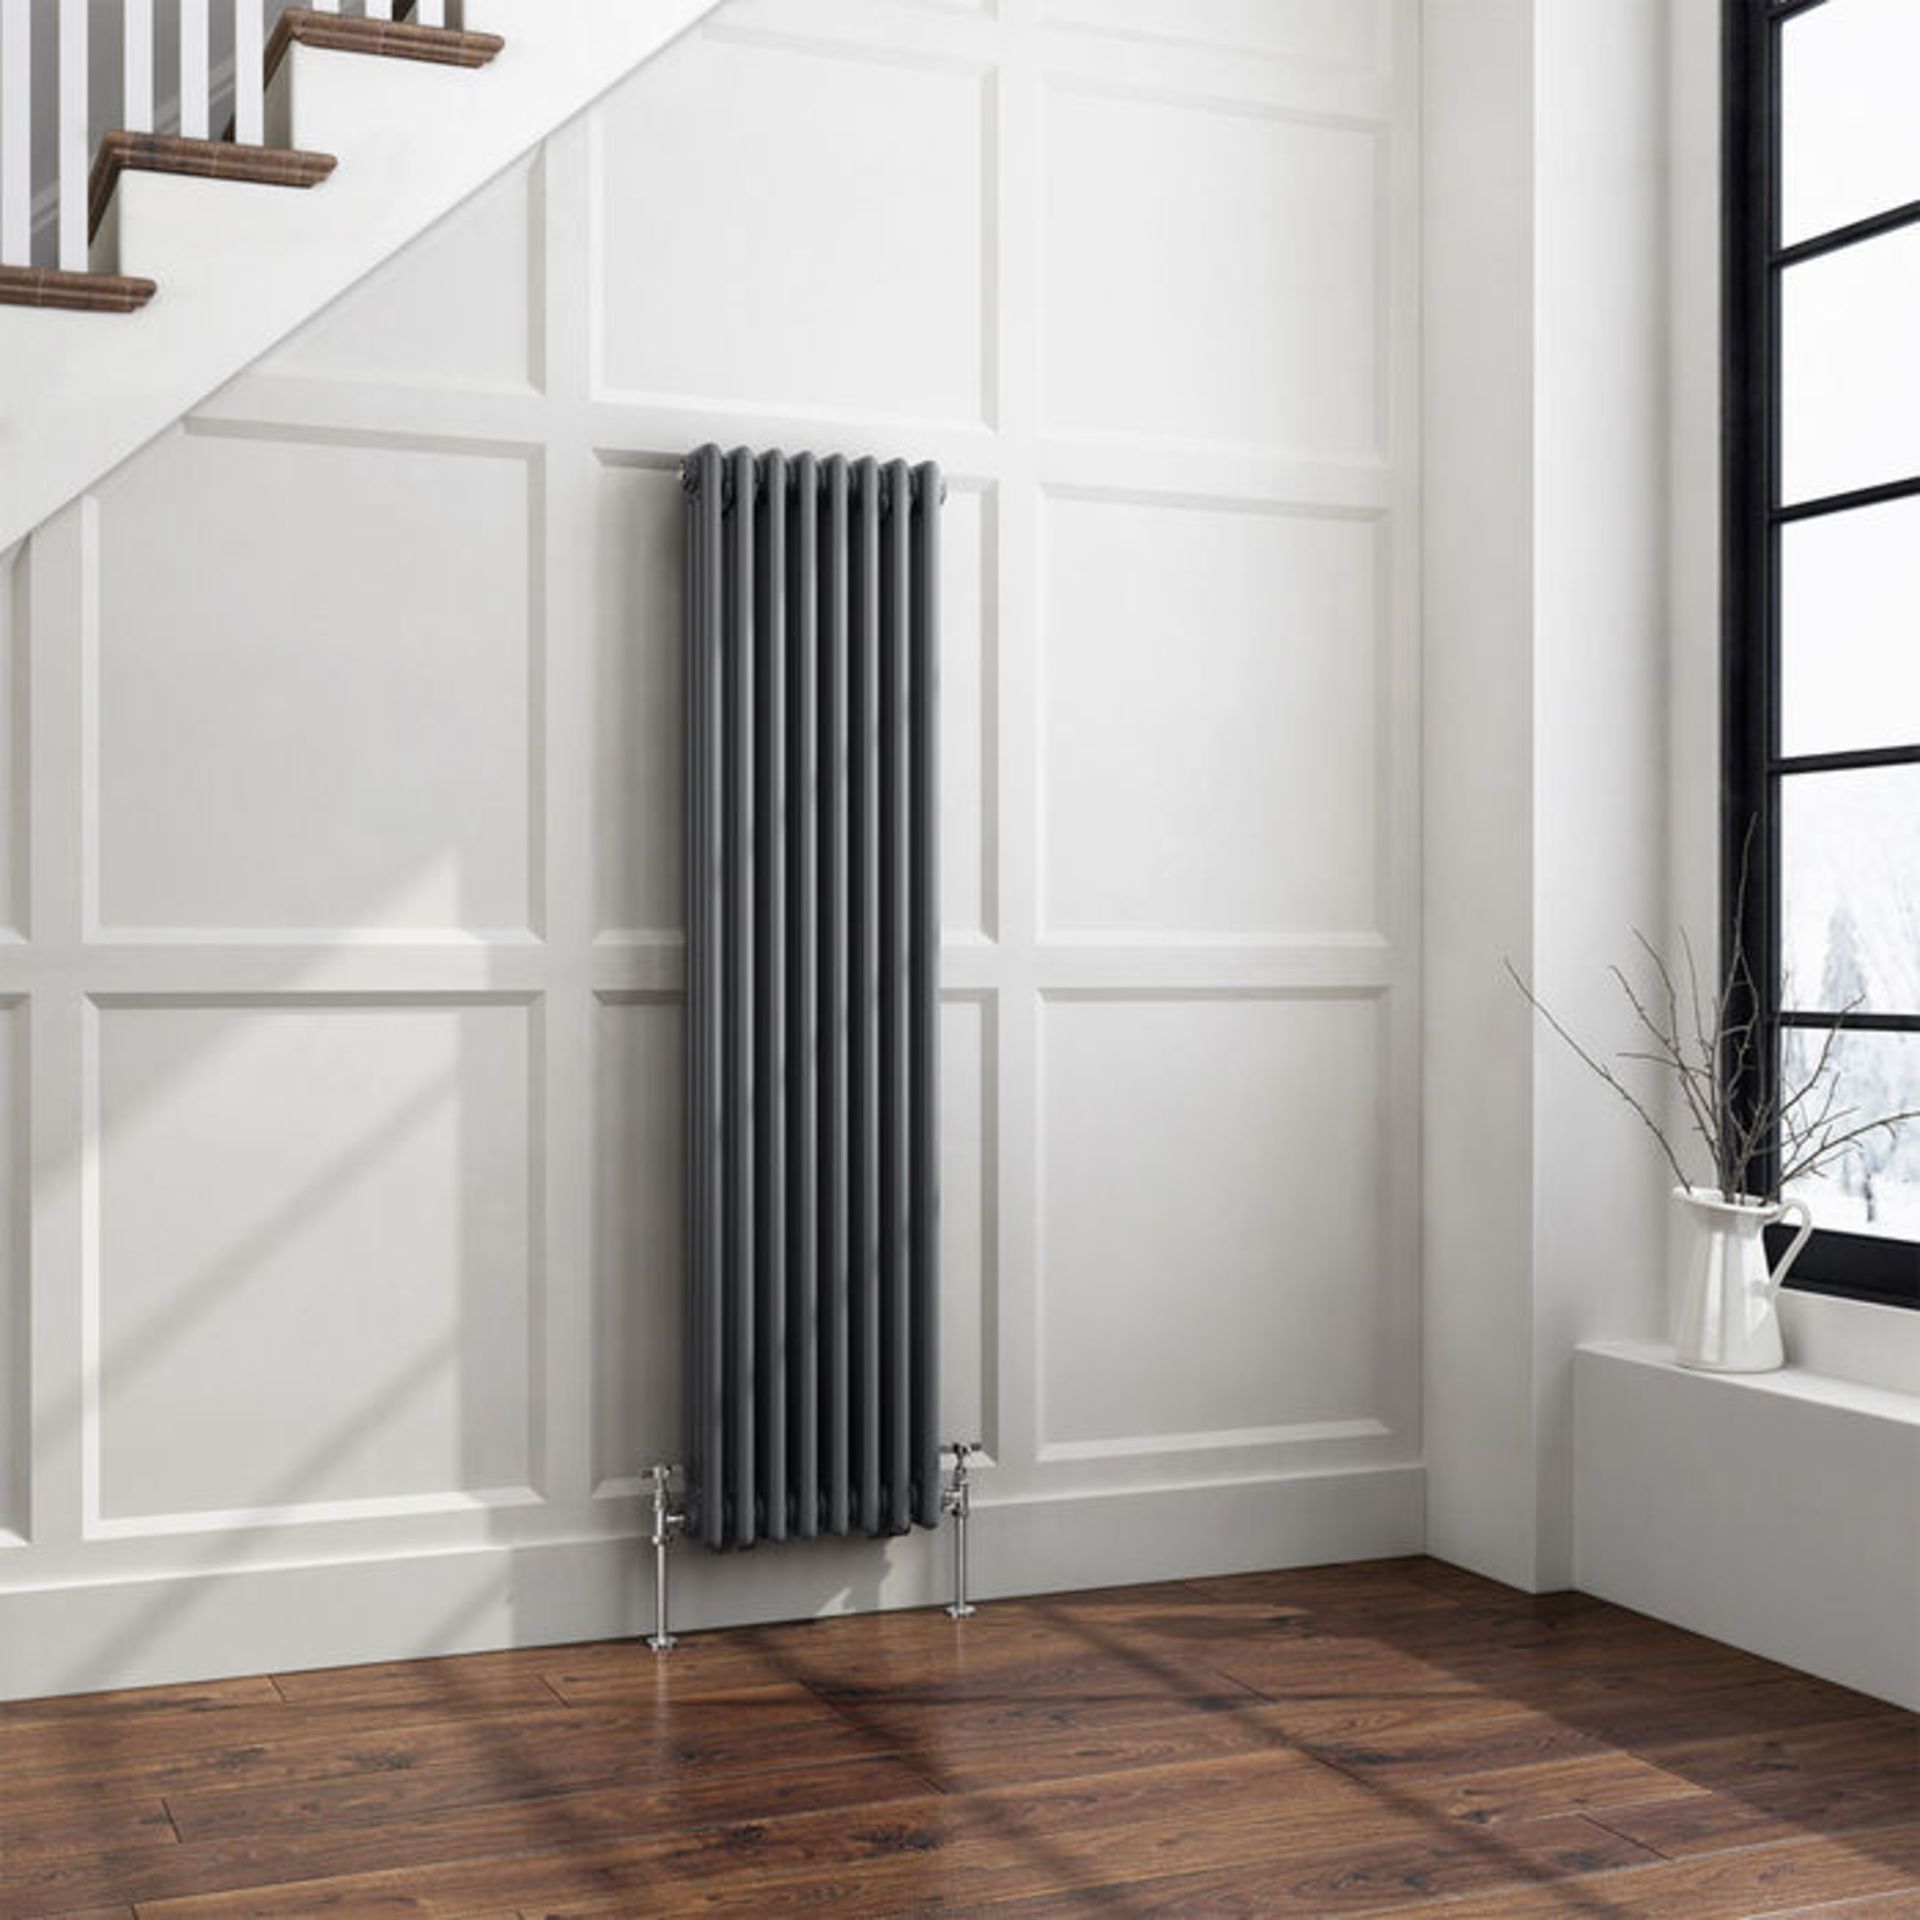 (W114) 1500x380mm Anthracite Triple Panel Vertical Colosseum Traditional Radiator. RRP £399.99. Made - Image 3 of 4